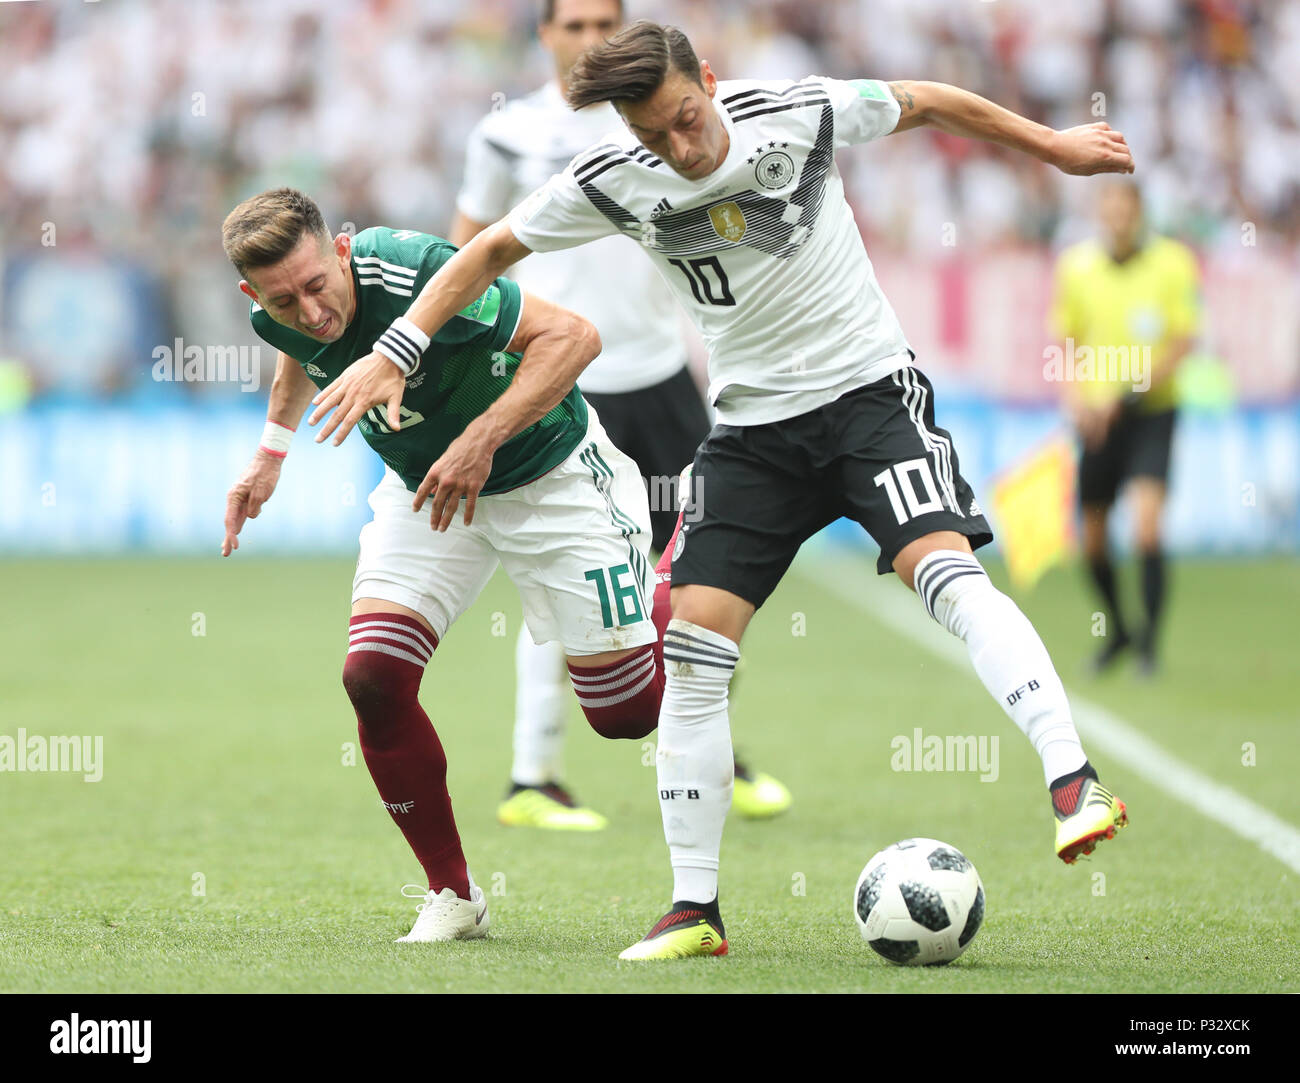 Moscow, Russia. 17th June, 2018. Mesut Oezil (R) of Germany vies with Hector Herrera of Mexico during a group F match between Germany and Mexico at the 2018 FIFA World Cup in Moscow, Russia, June 17, 2018. Credit: Xu Zijian/Xinhua/Alamy Live News Stock Photo